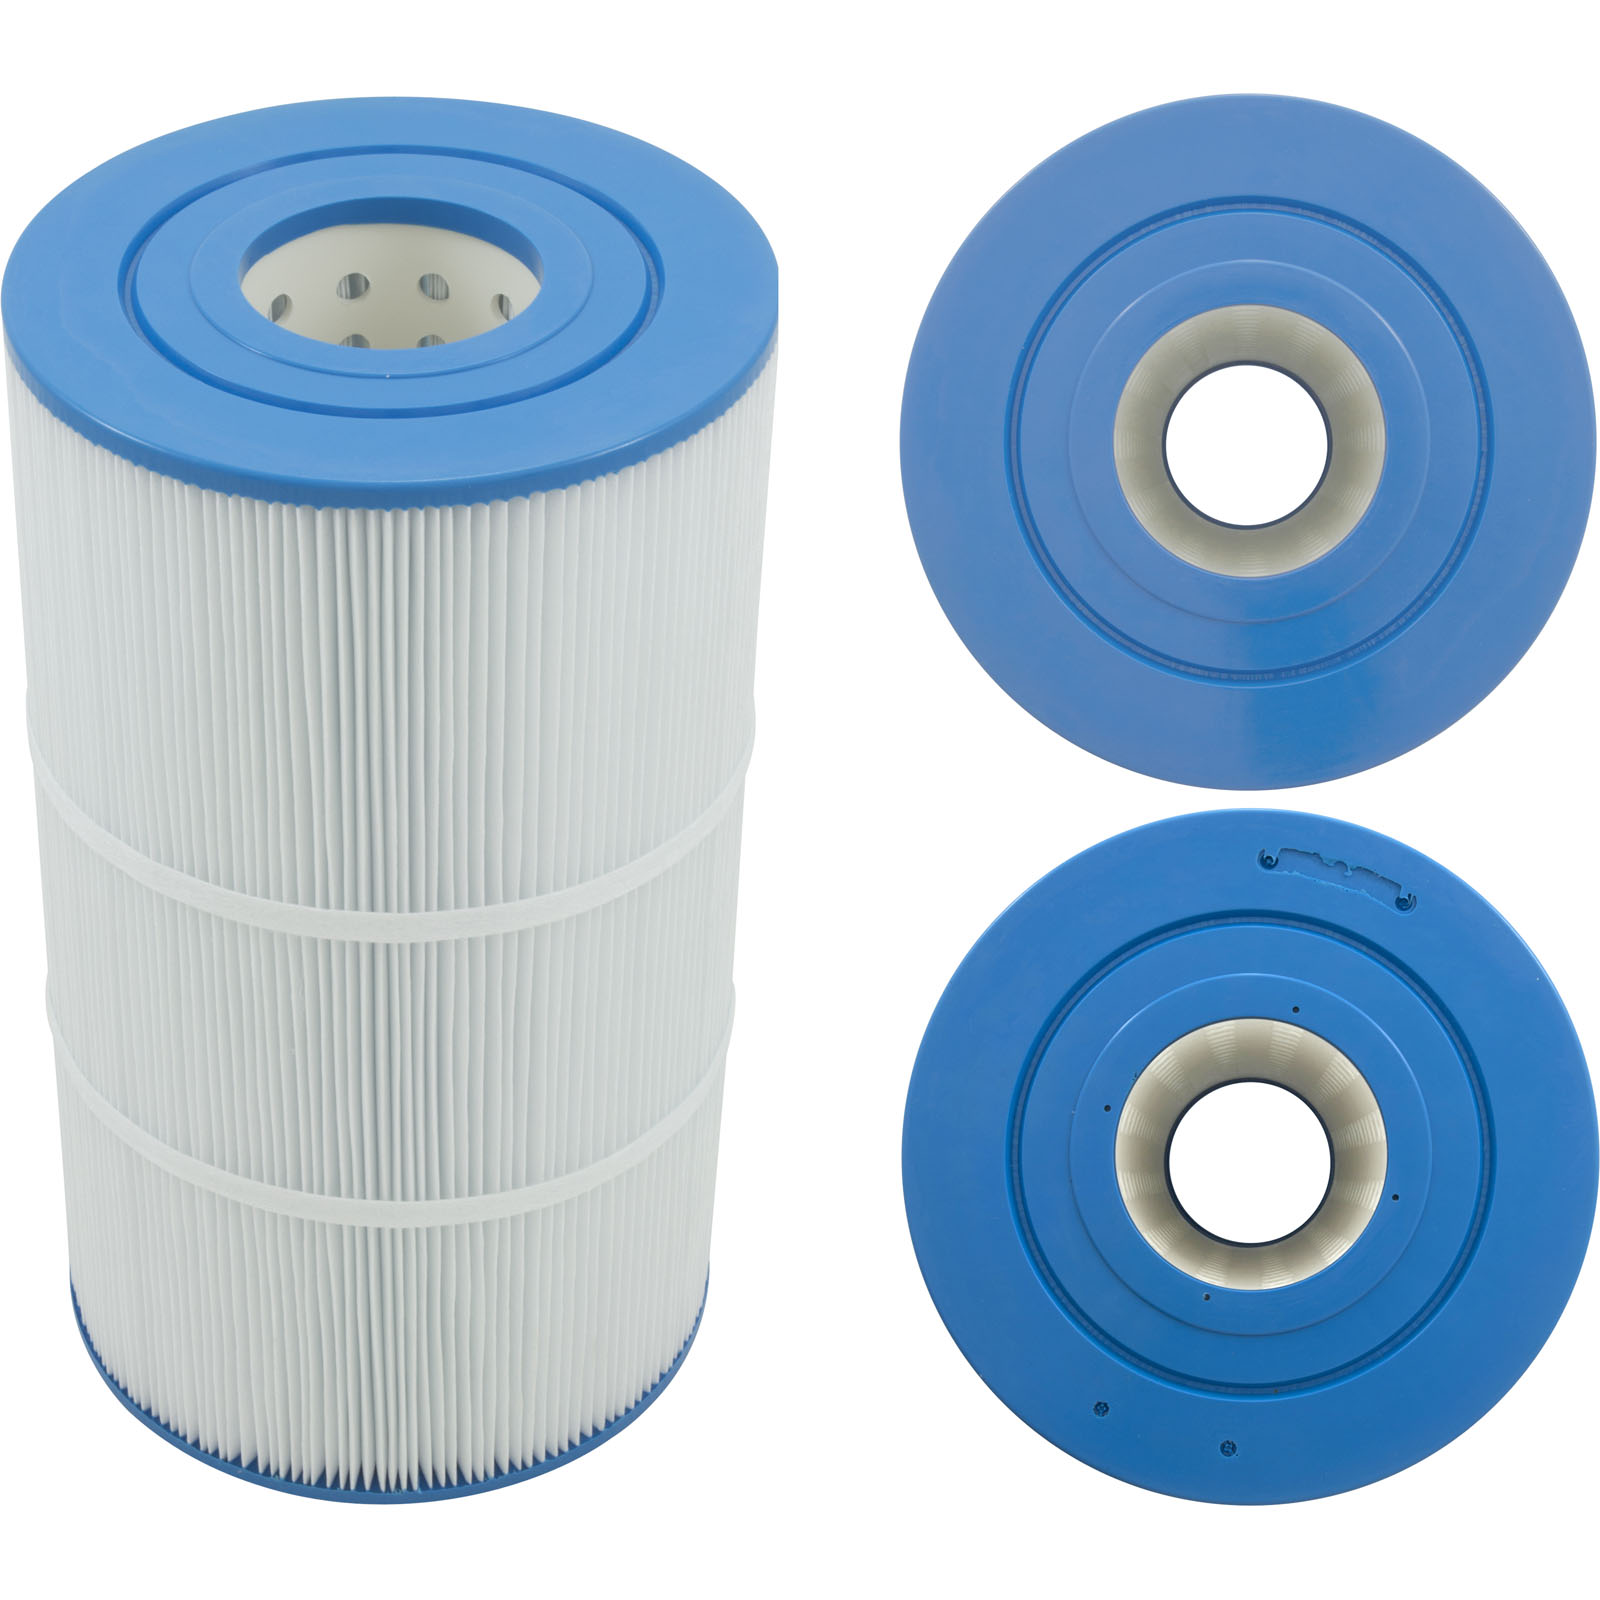 Pac Fab MY-60 Replacement Filter Cartridge - PFAB60, C-7660, FC-1930